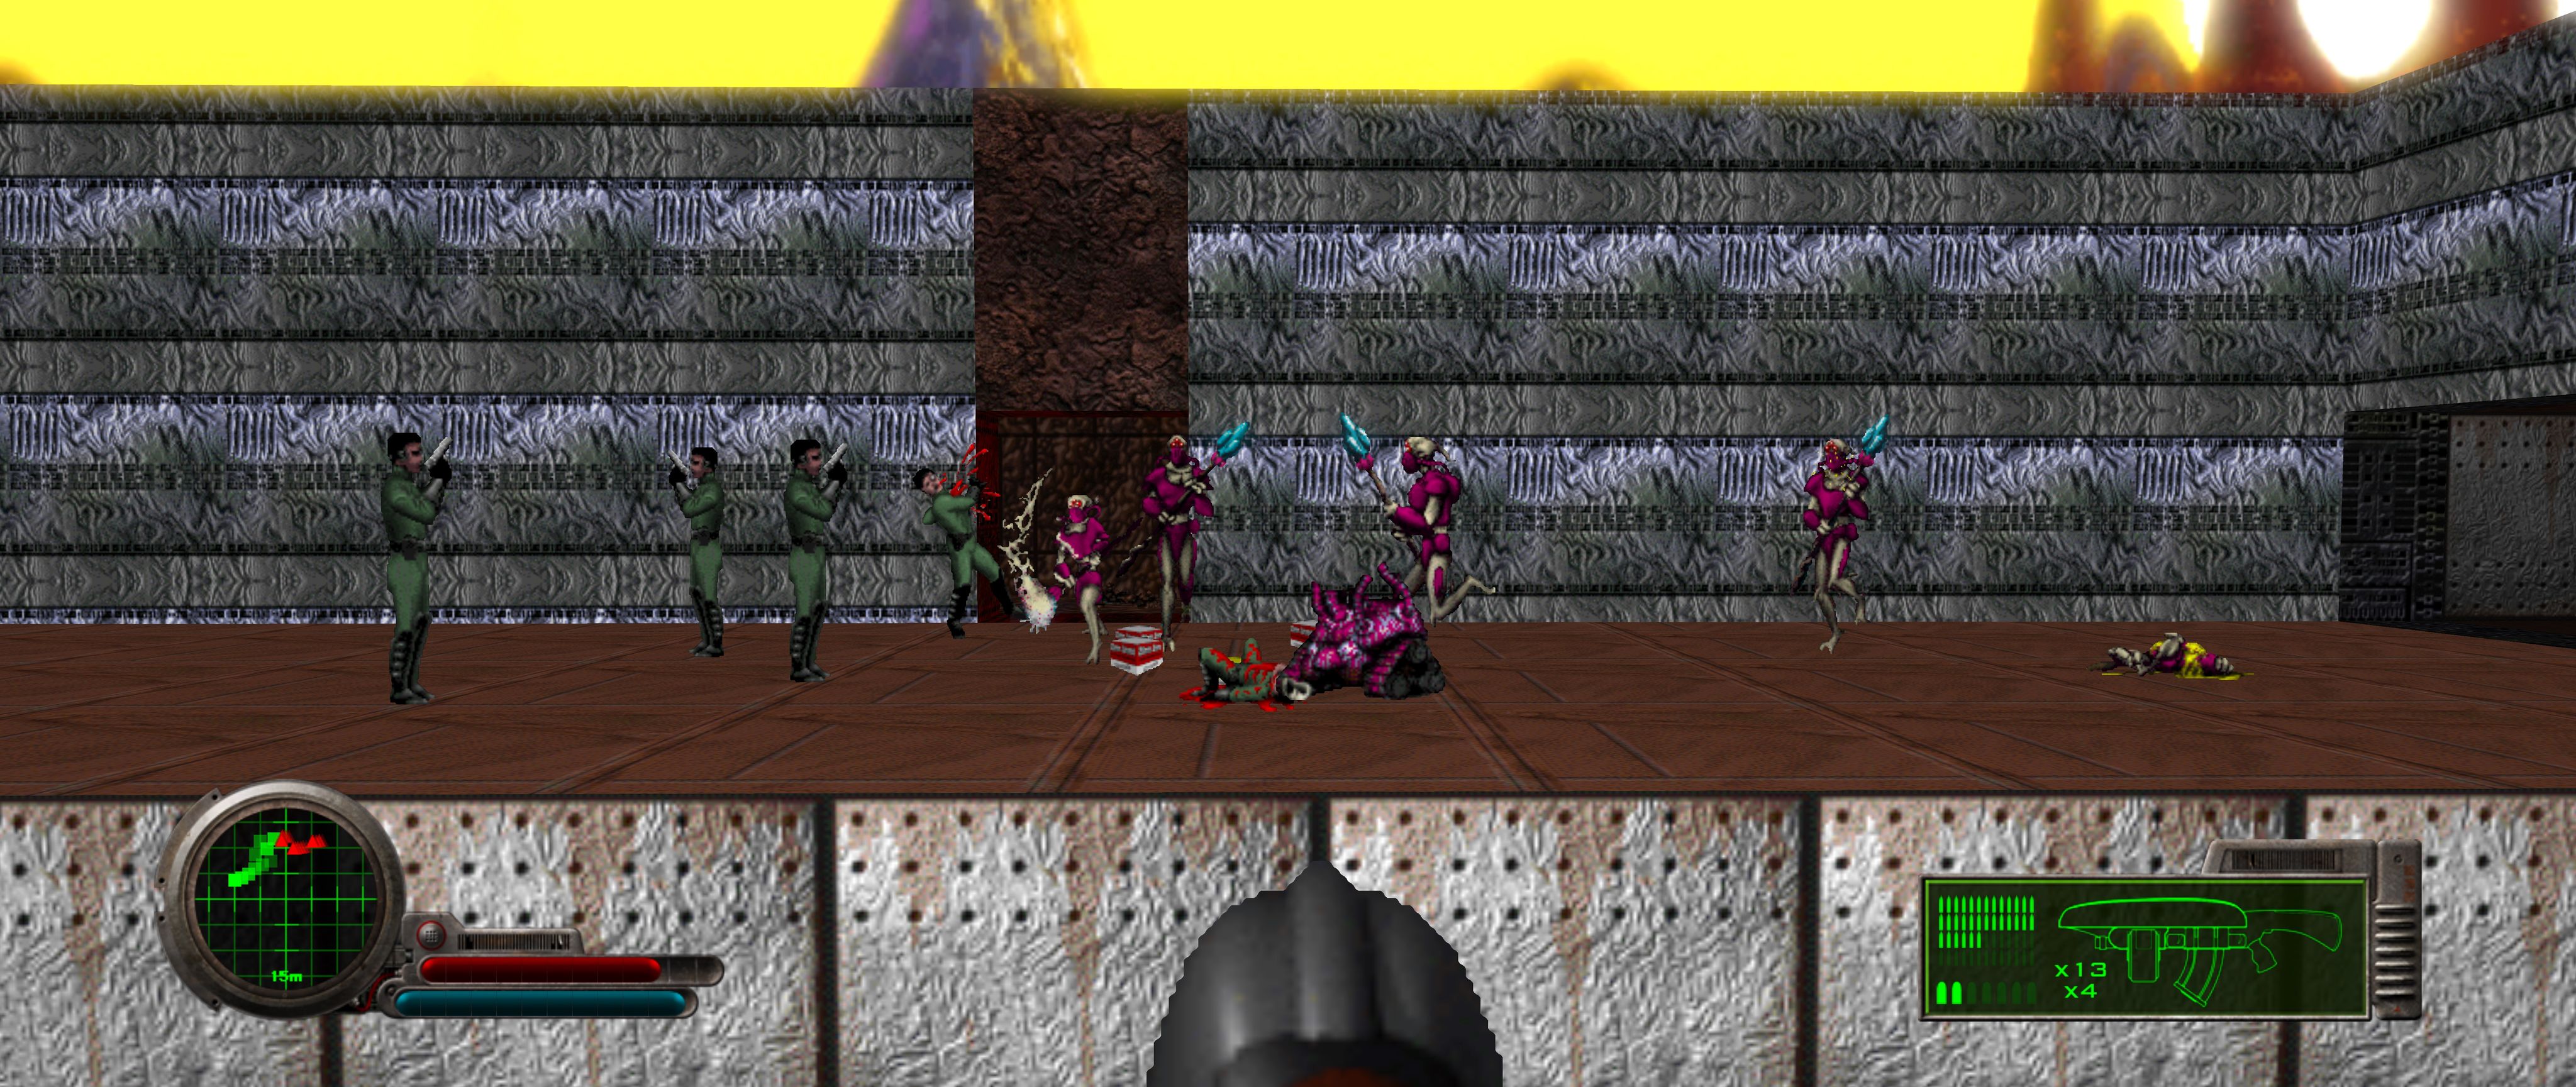 A screenshot from the first-person shooter "Marathon 2: Durandal". There's three humans in green jumpsuits holding handguns who are fighting four purple aliens armed with staves, and there's a fourth human who's in the middle of a gruesome death from one of the aliens. The aliens and humans are both quite clearly 2D sprites, though they've been upscaled so they look a bit less awful.